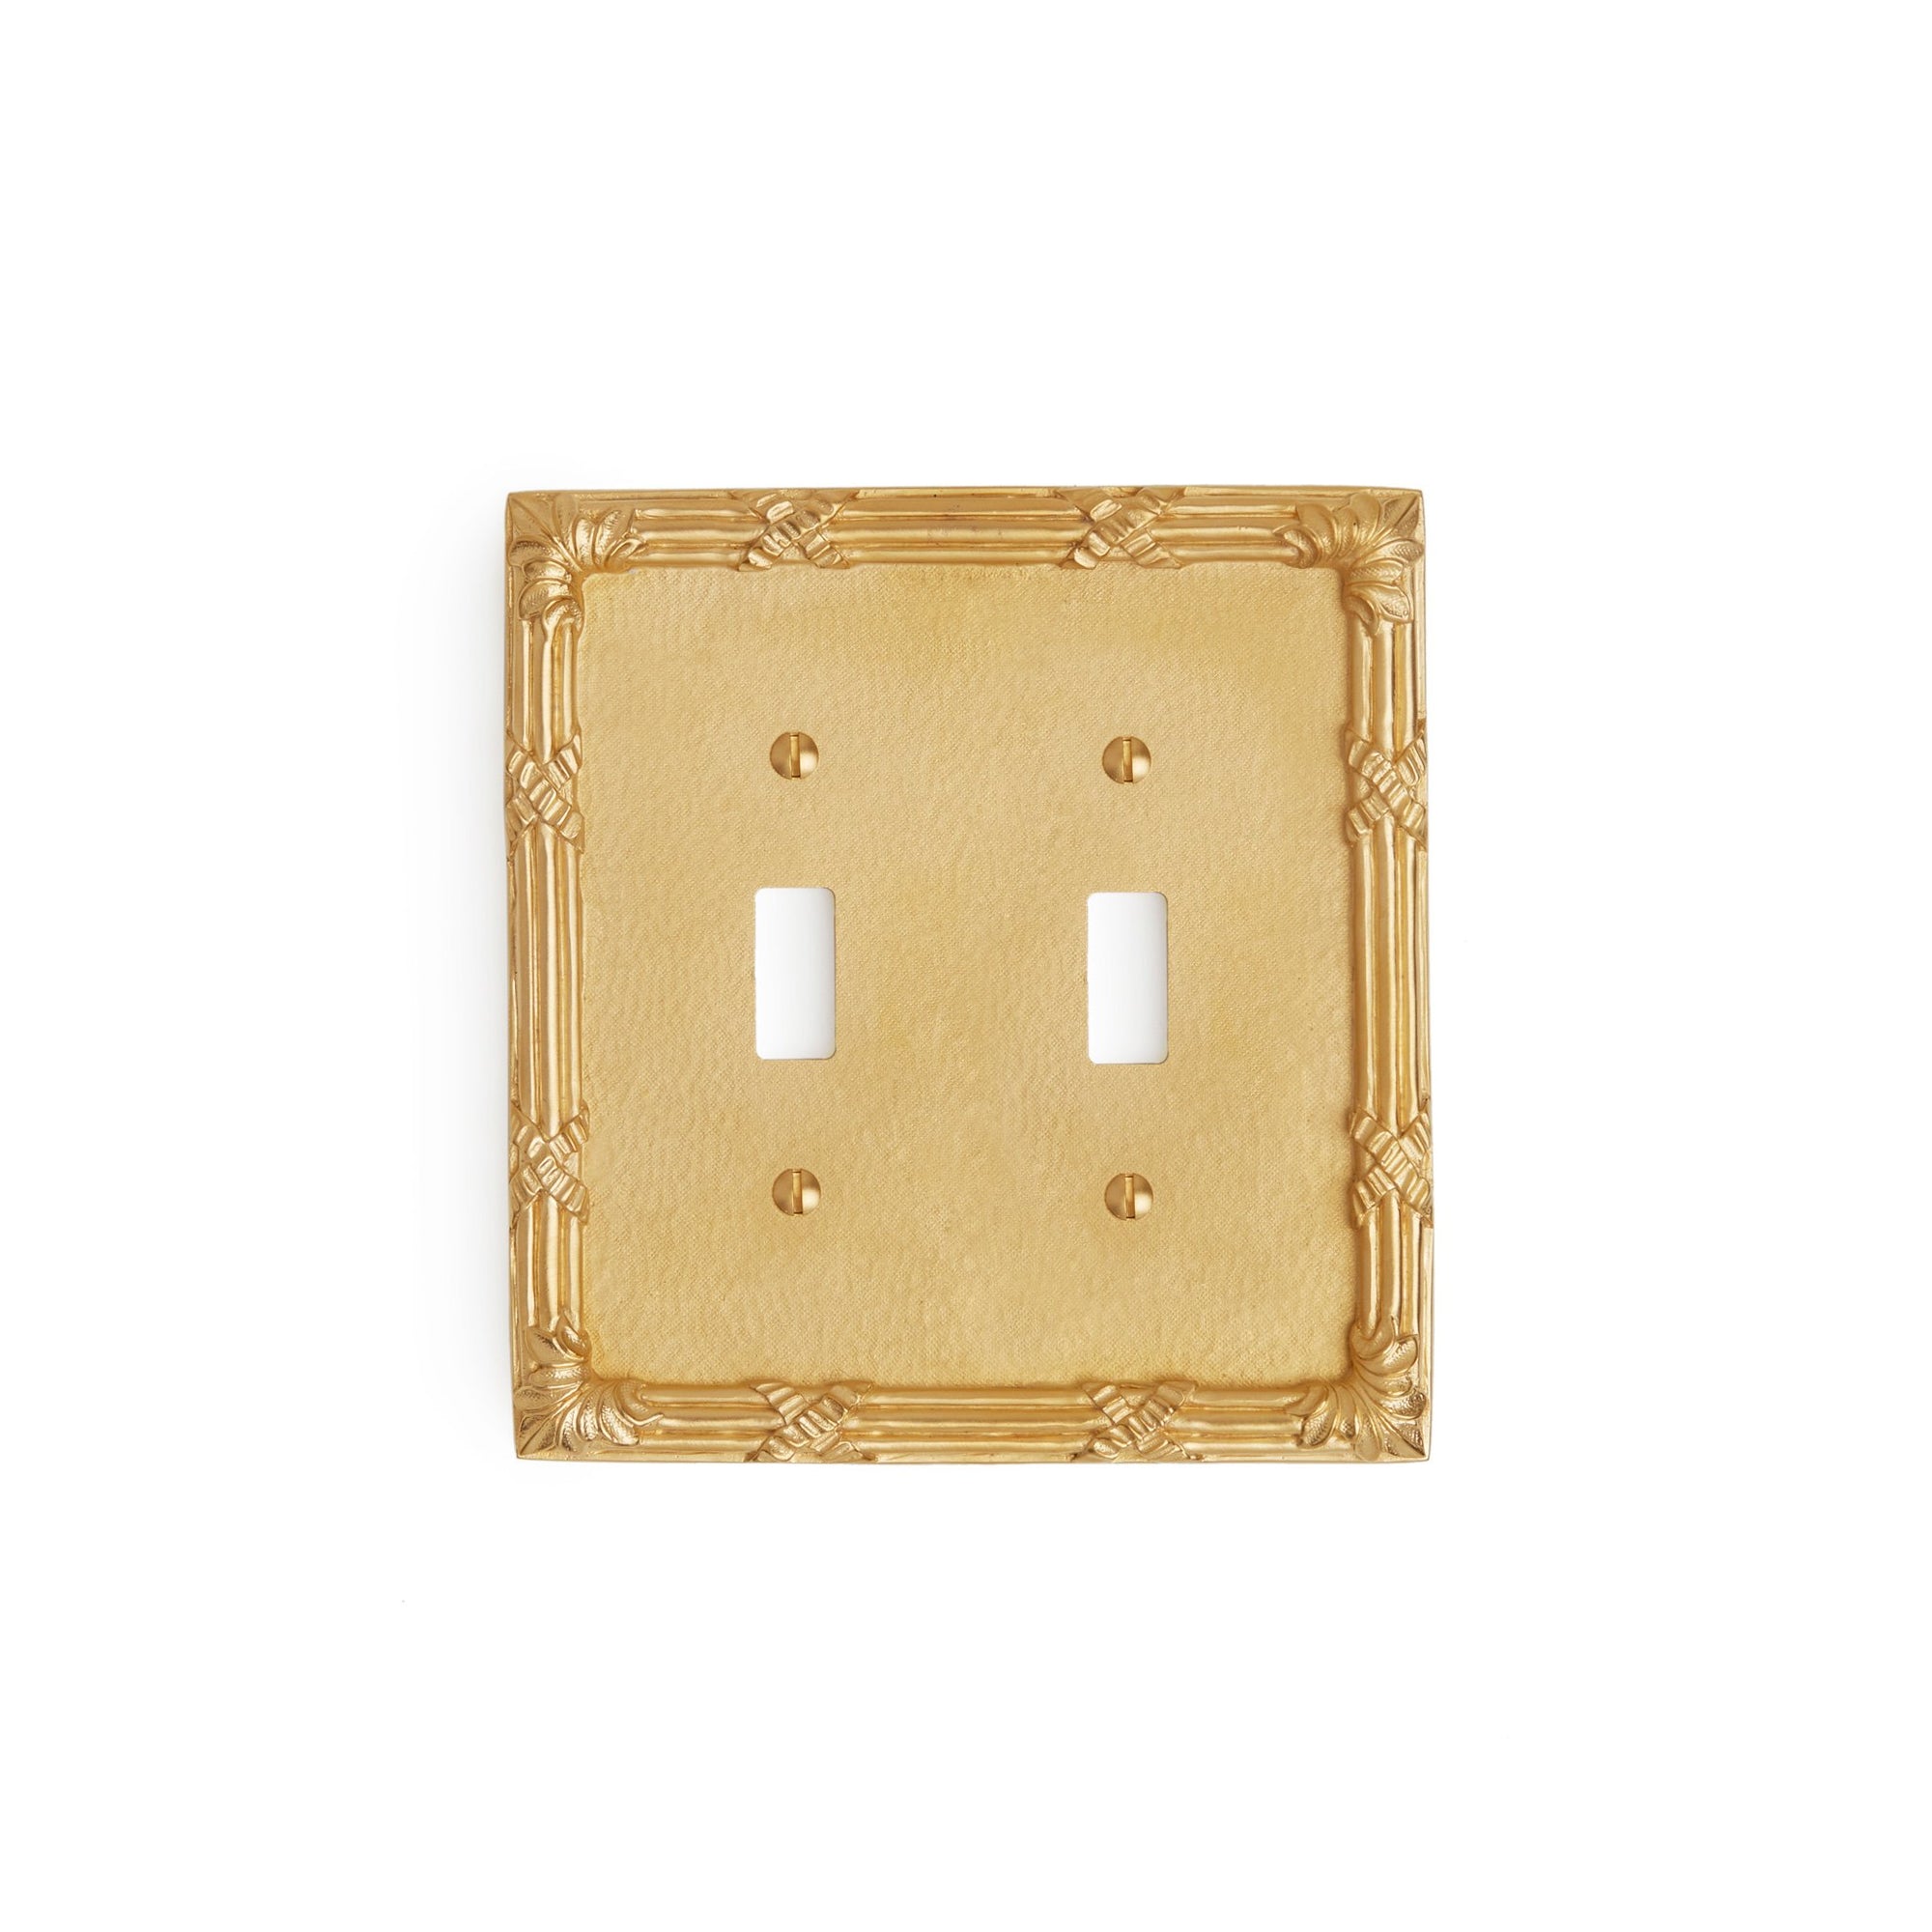 0460D-SWT-GP Sherle Wagner International Ribbon & Reed Double Switch Plate in Gold Plate metal finish